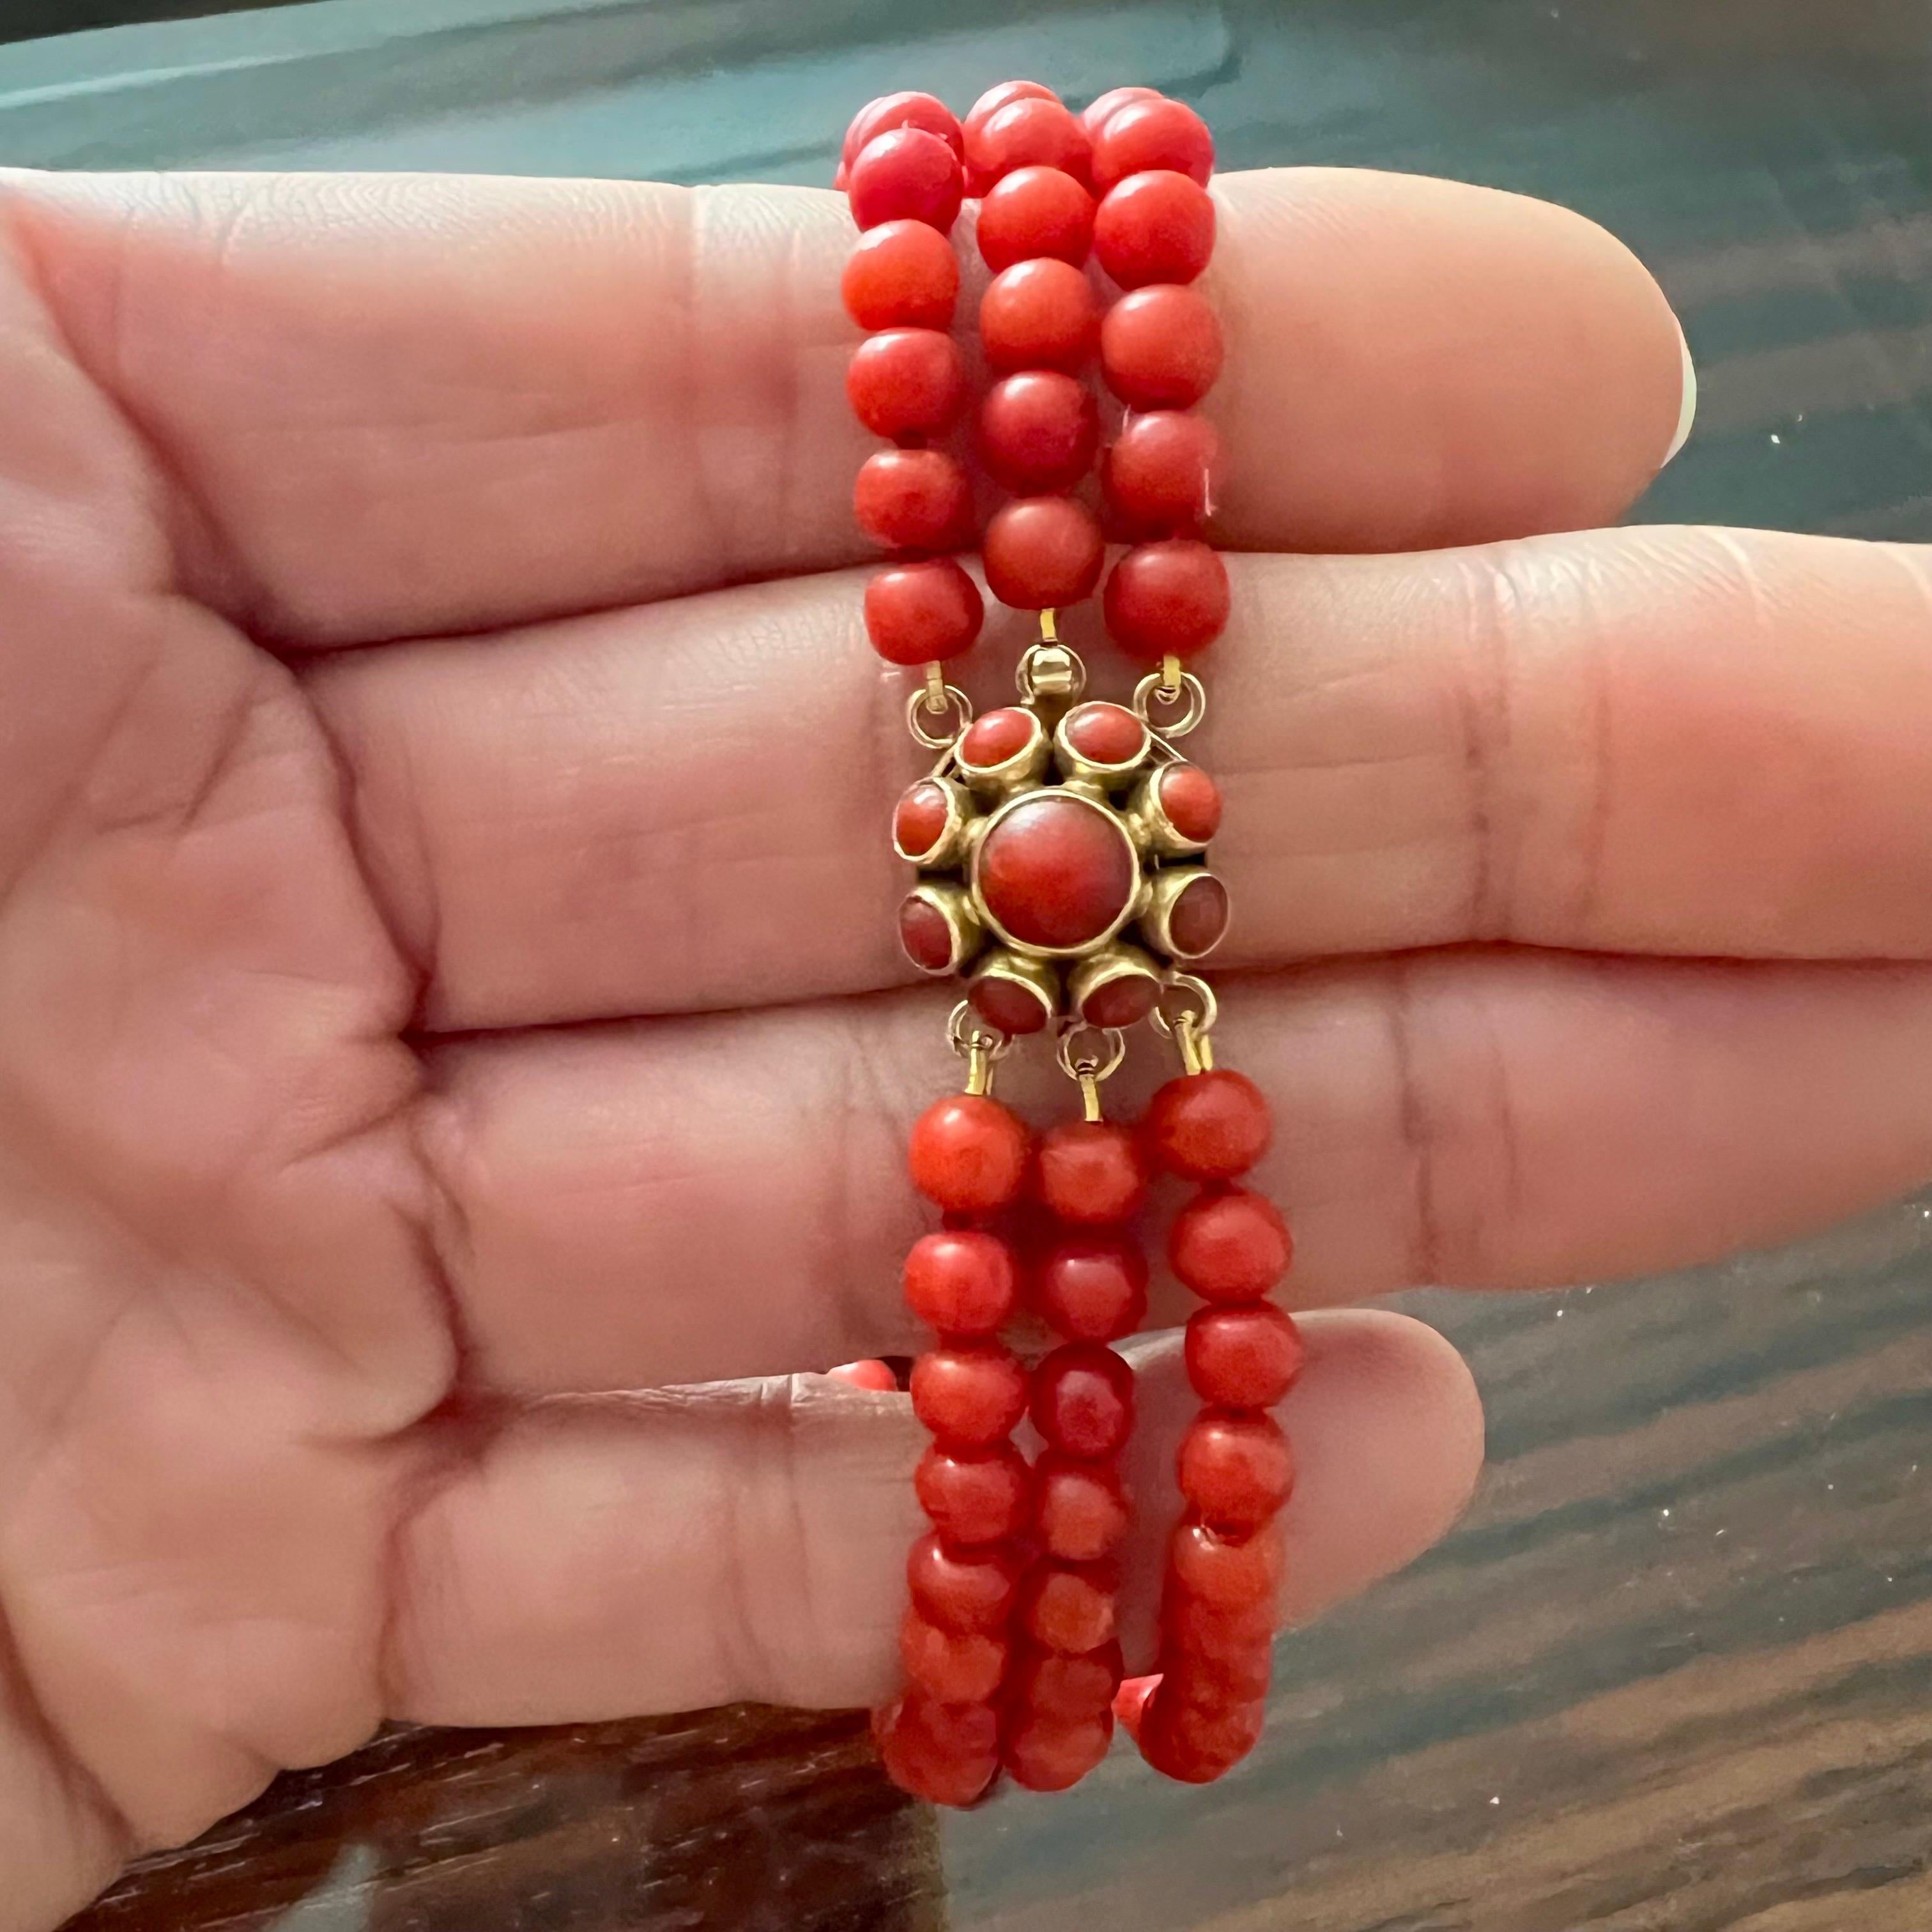 This is a vintage natural red coral three-strand bracelet created with a 14 karat gold clasp. The coral beads are round-shaped and are all equal in size and shape. The  beautiful round clasp is set with a cluster of red coral cabochon stones.

These